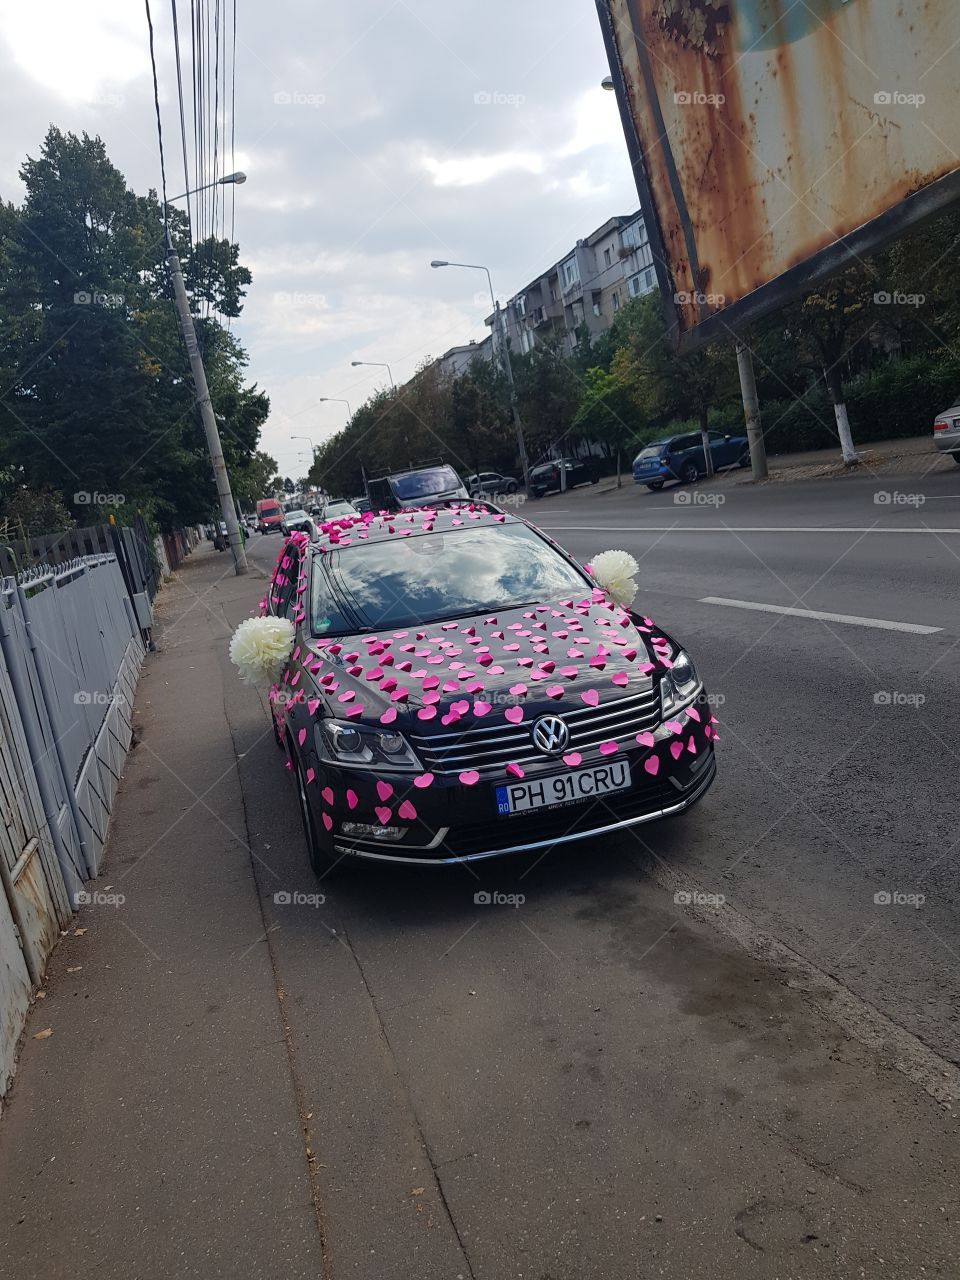 overly decorated car